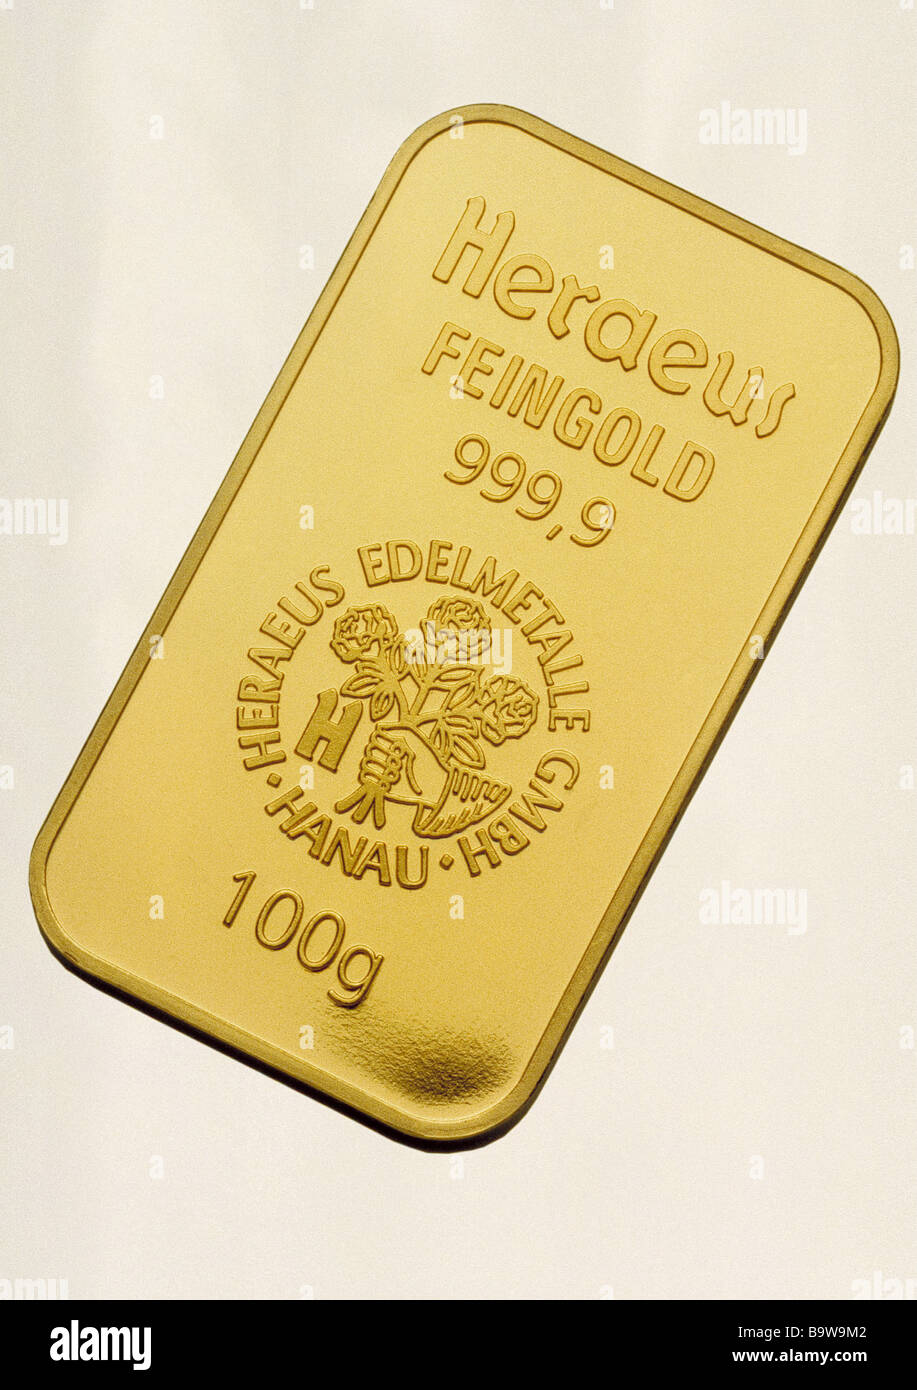 hundred nine gold bar procurement precious metal pure gold bar company name cut out investmentsembossed gold ingot golden Stock Photo